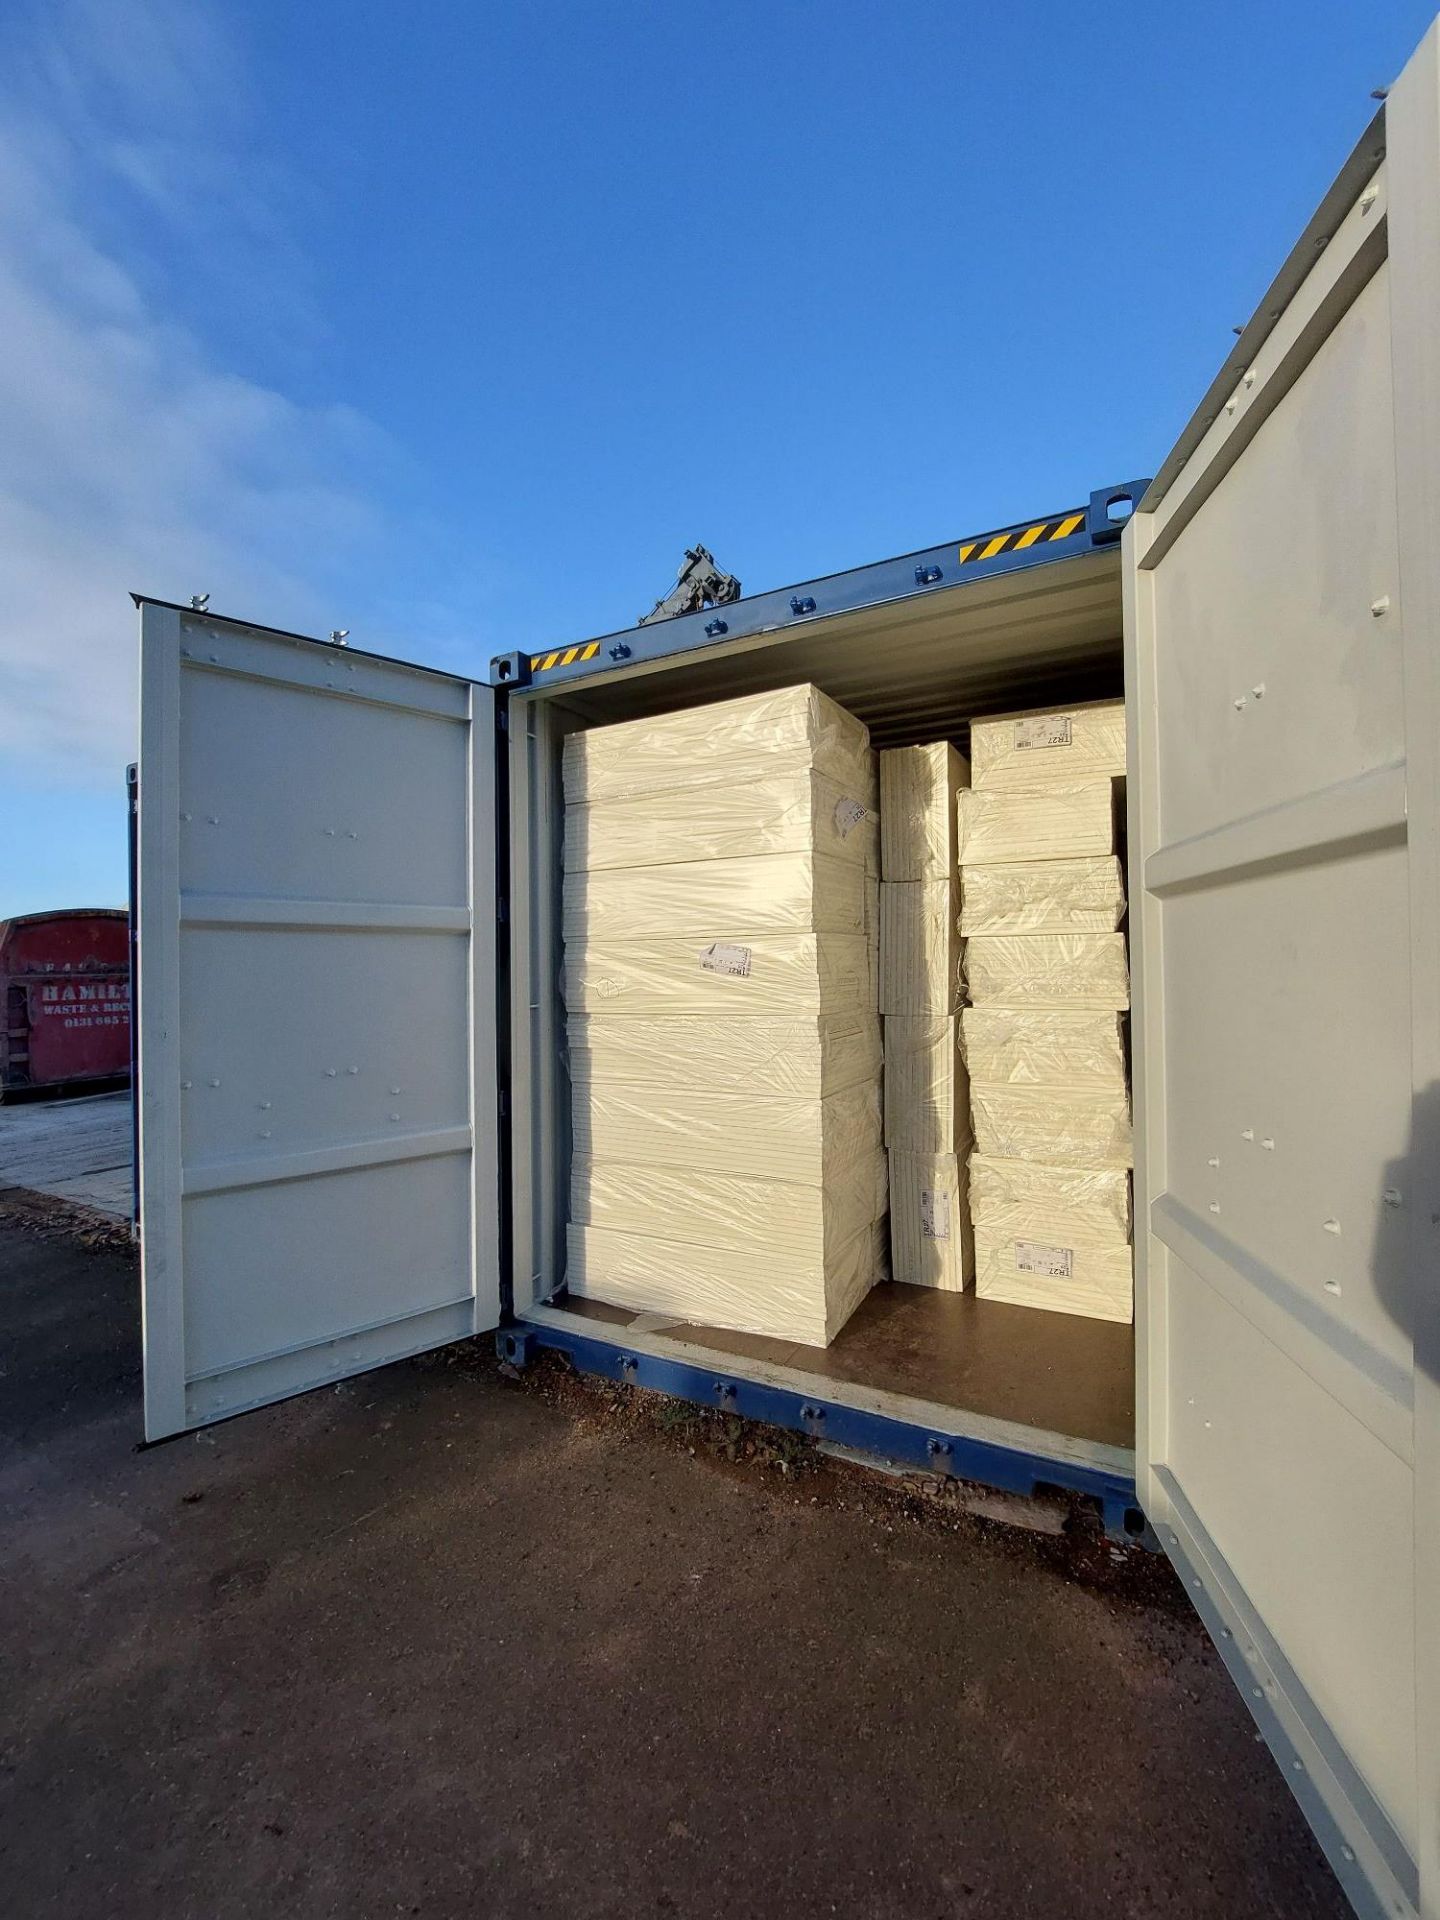 Contents only of 40' Container: Kingspan Thermaroof TR27 25mm insulation board. - Image 2 of 3